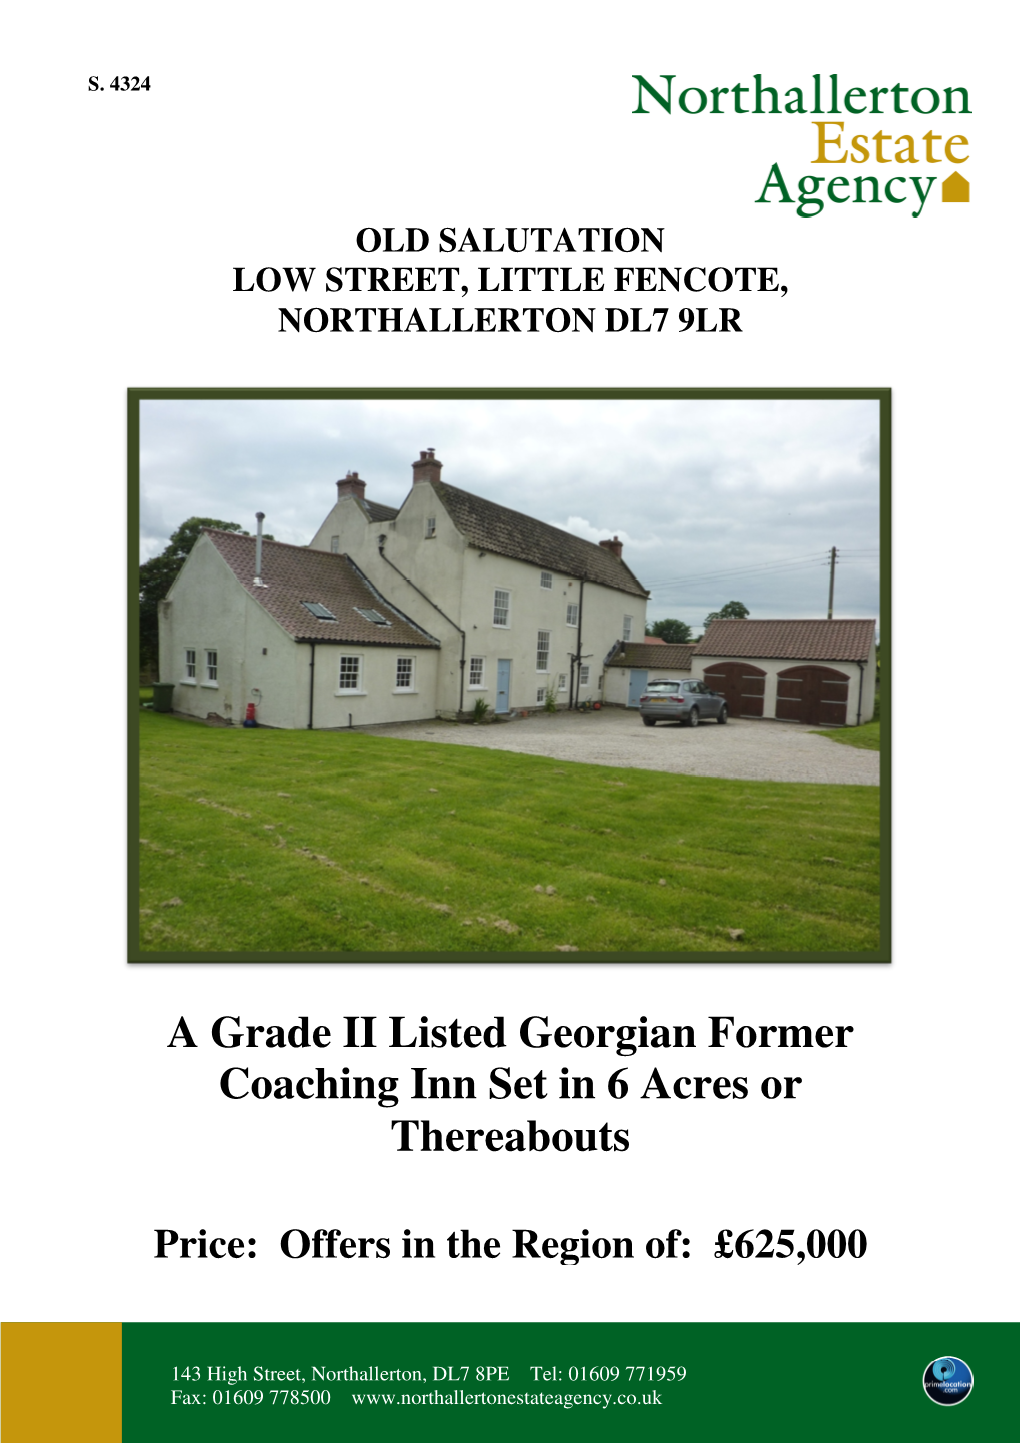 A Grade II Listed Georgian Former Coaching Inn Set in 6 Acres Or Thereabouts